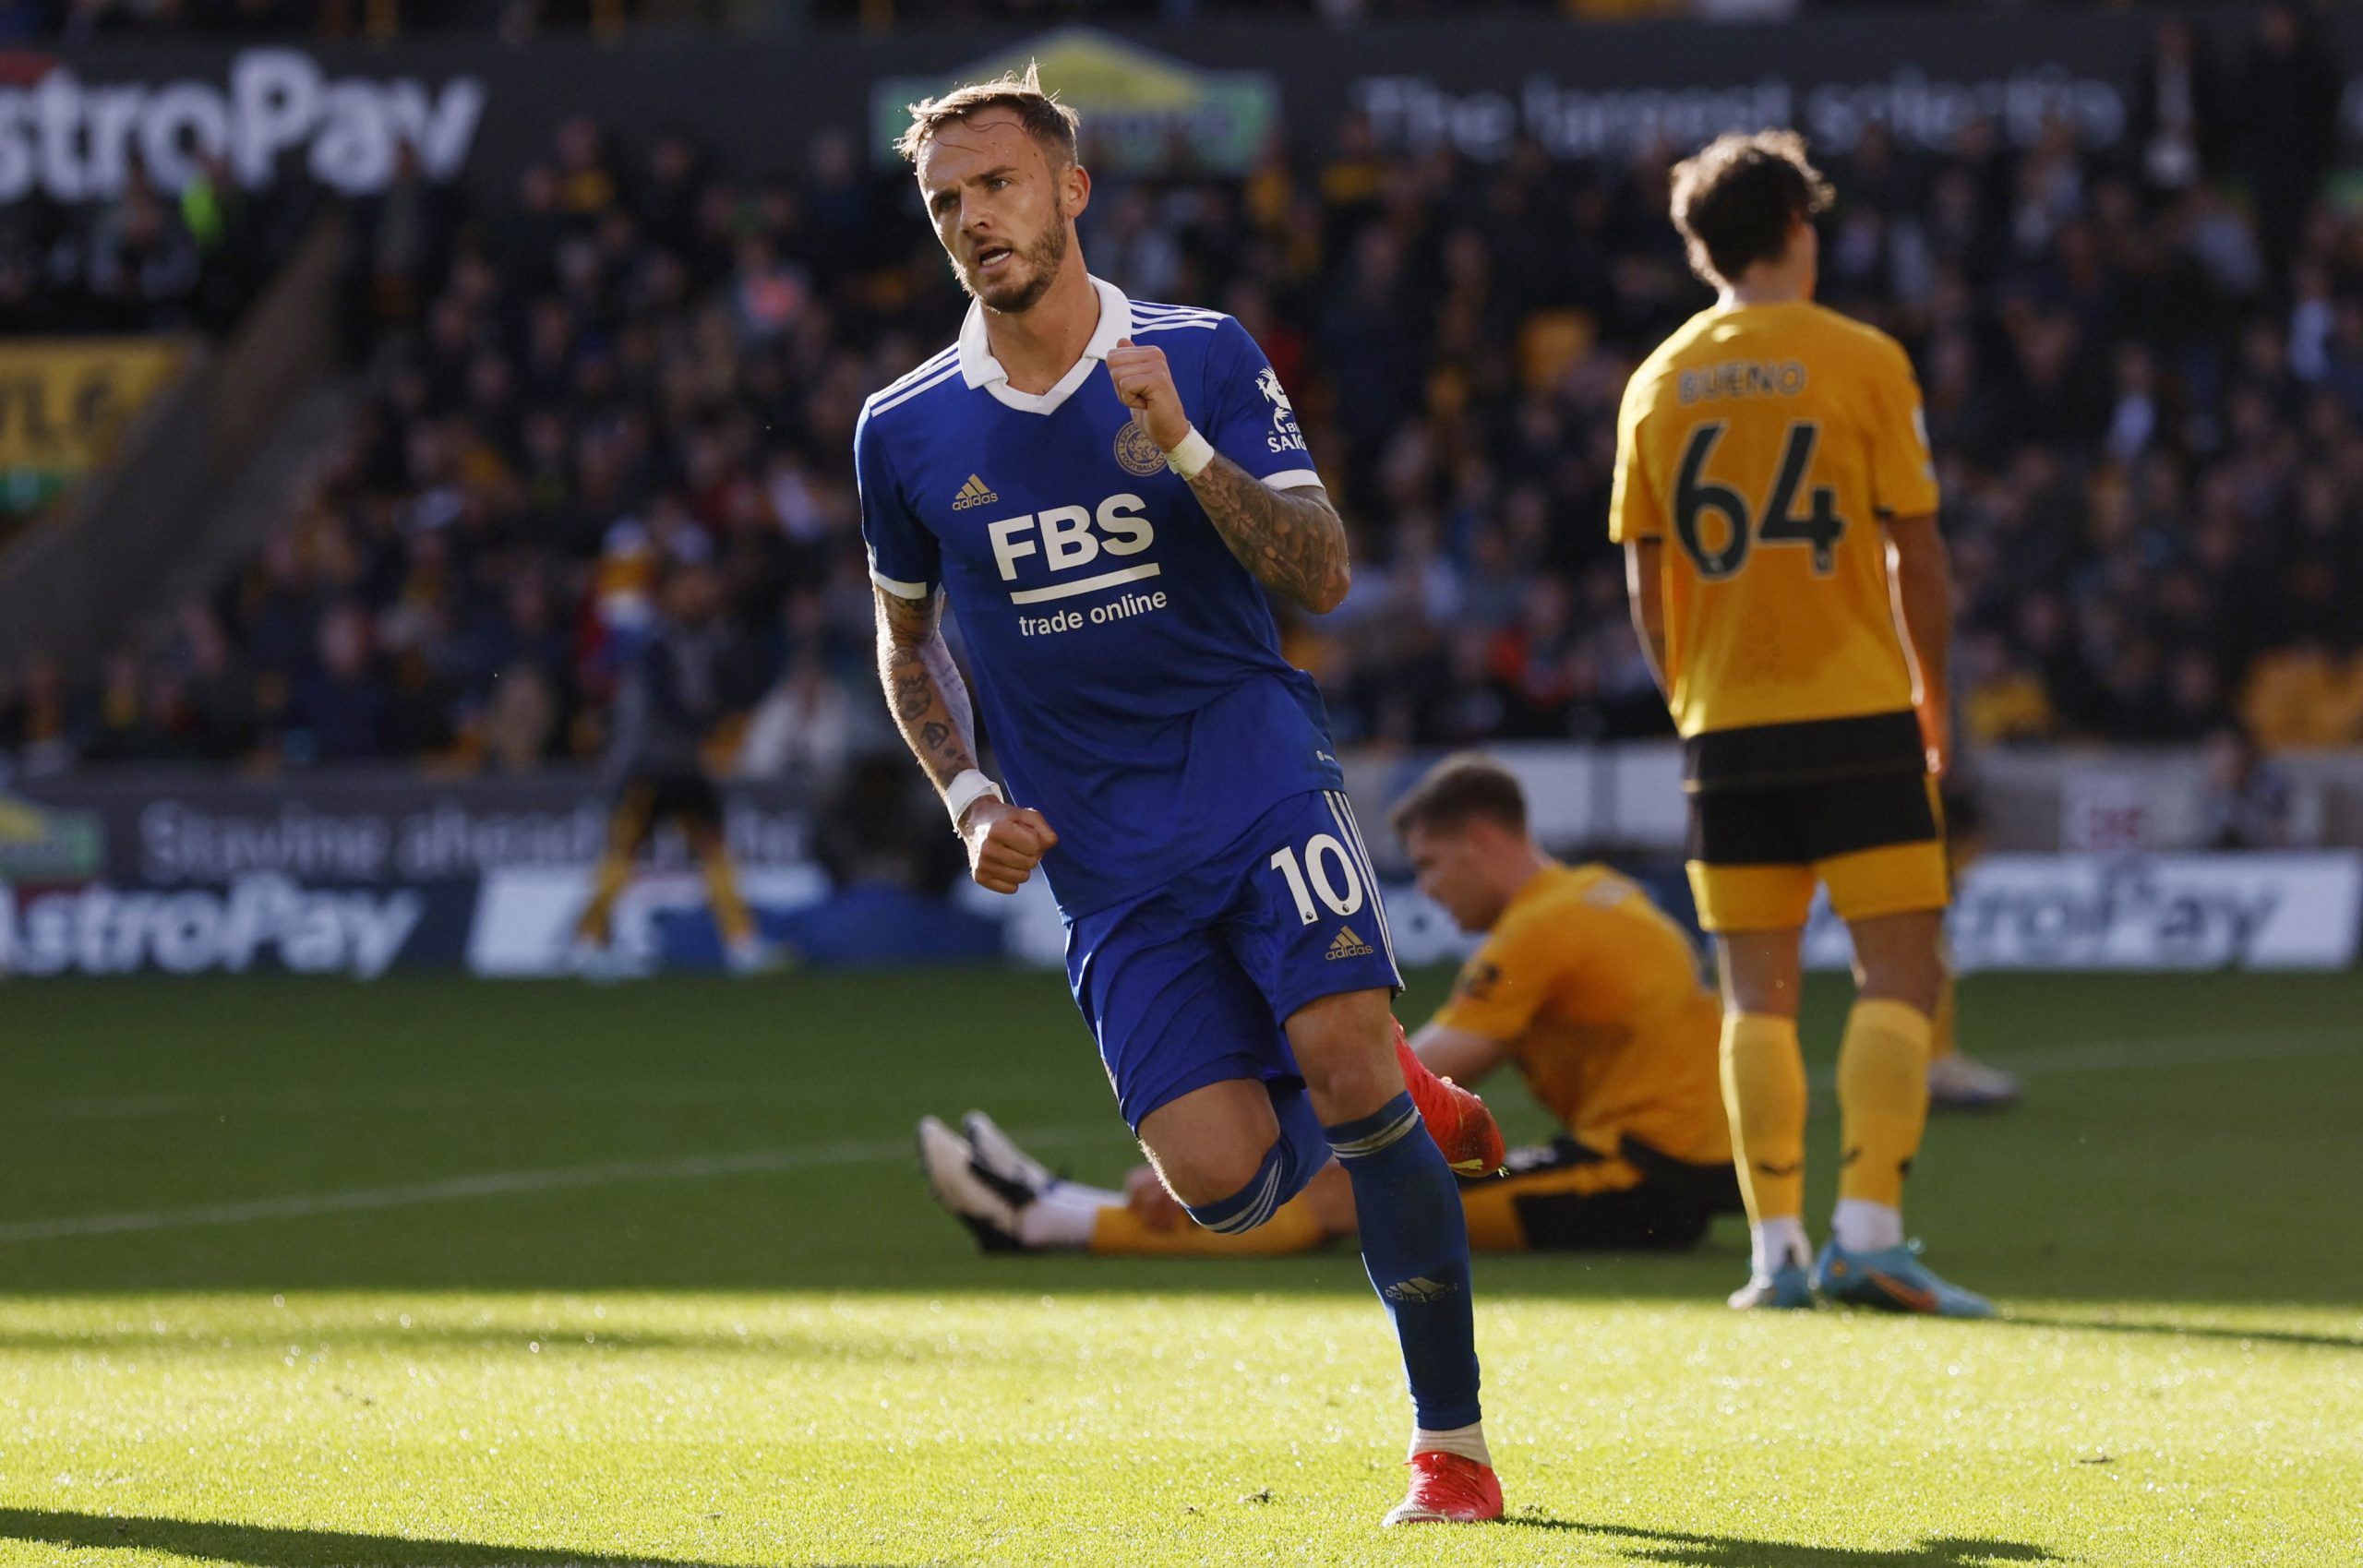 Soccer Football - Premier League - Wolverhampton Wanderers v Leicester City - Molineux Stadium, Wolverhampton, Britain - October 23, 2022 Leicester City's James Maddison celebrates scoring their third goal Action Images via Reuters/Andrew Couldridge EDITORIAL USE ONLY. No use with unauthorized audio, video, data, fixture lists, club/league logos or 'live' services. Online in-match use limited to 75 images, no video emulation. No use in betting, games or single club /league/player publications.  